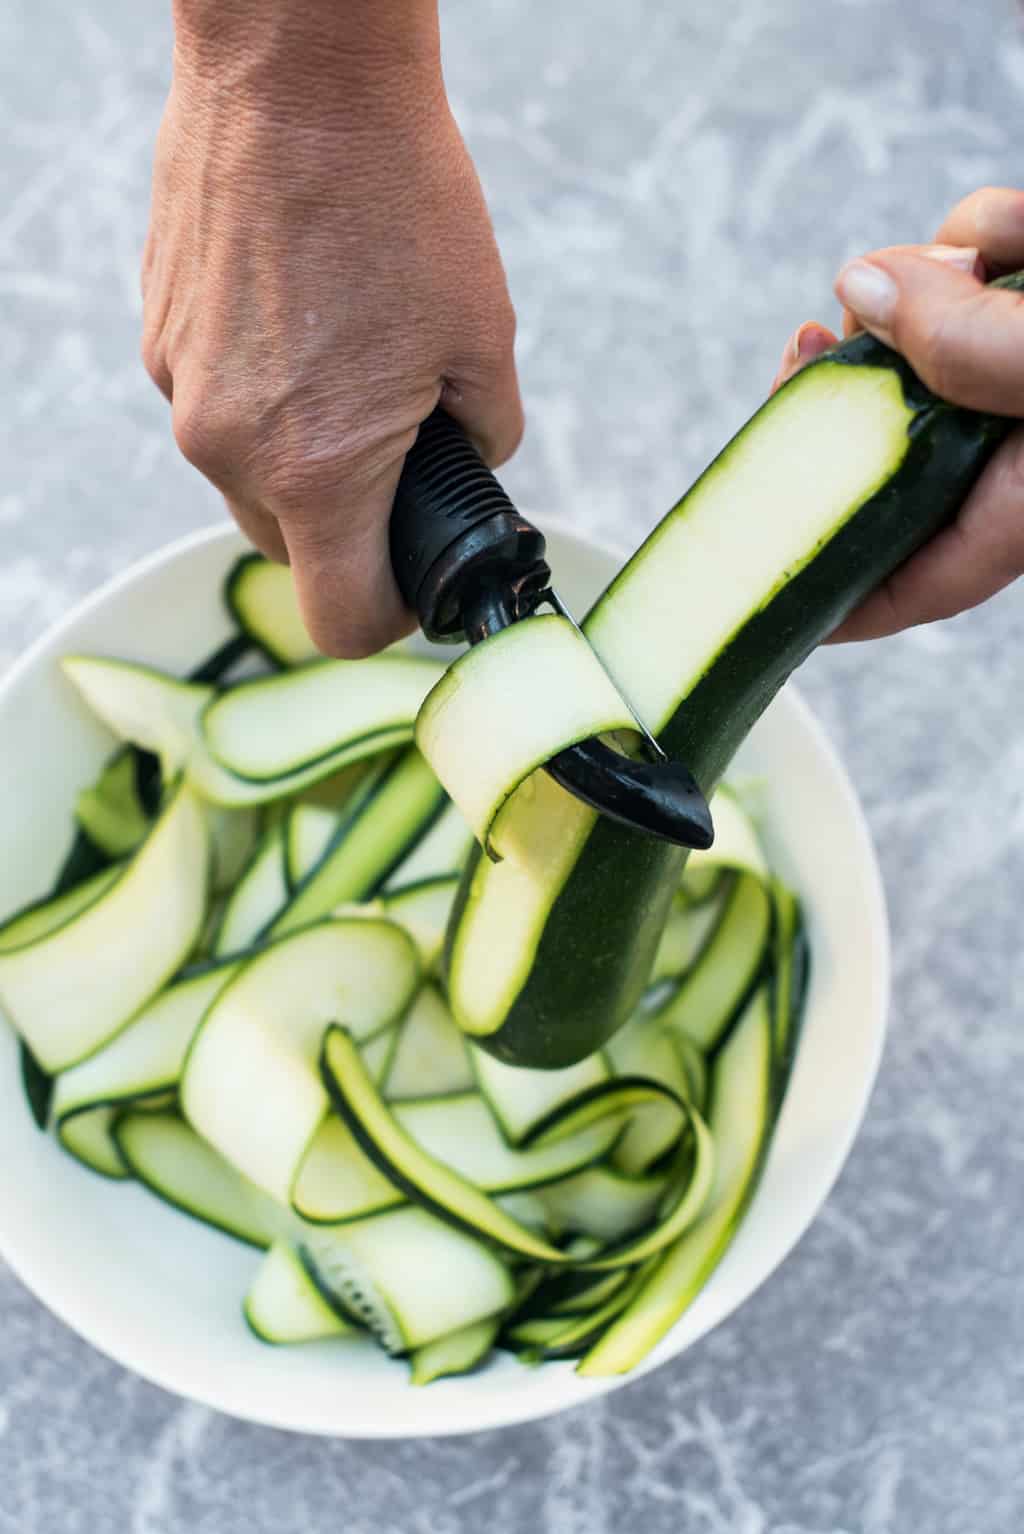 https://reluctantentertainer.com/wp-content/uploads/2011/09/How-to-make-zucchini-noodles-1.jpg